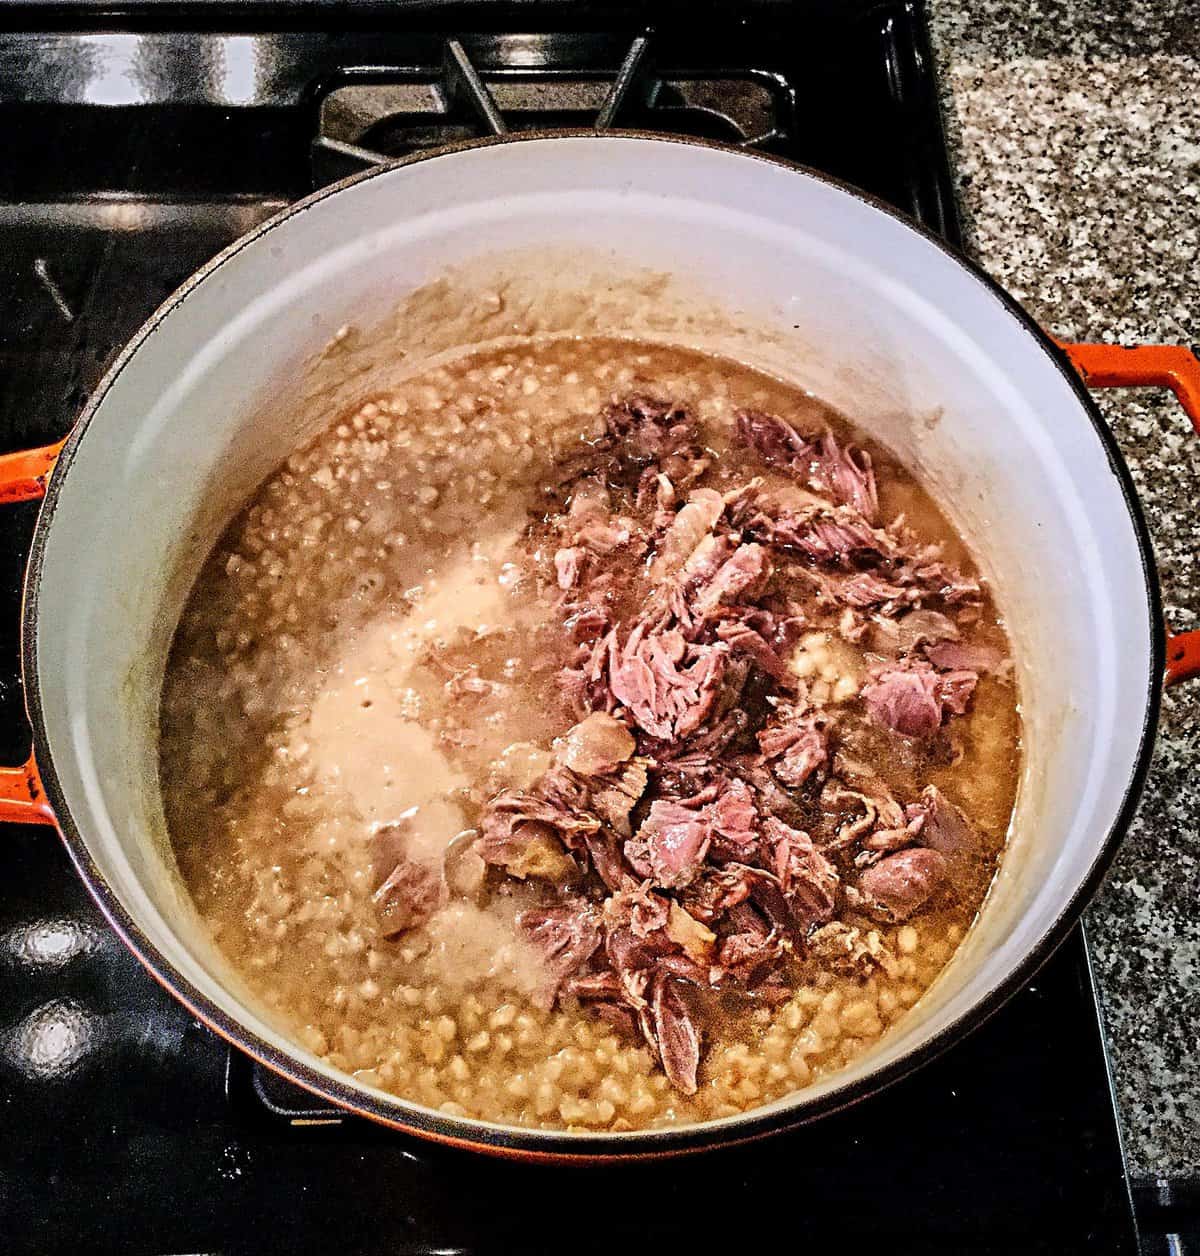  The aroma of the simmering lamb and spices will fill your kitchen with warmth.